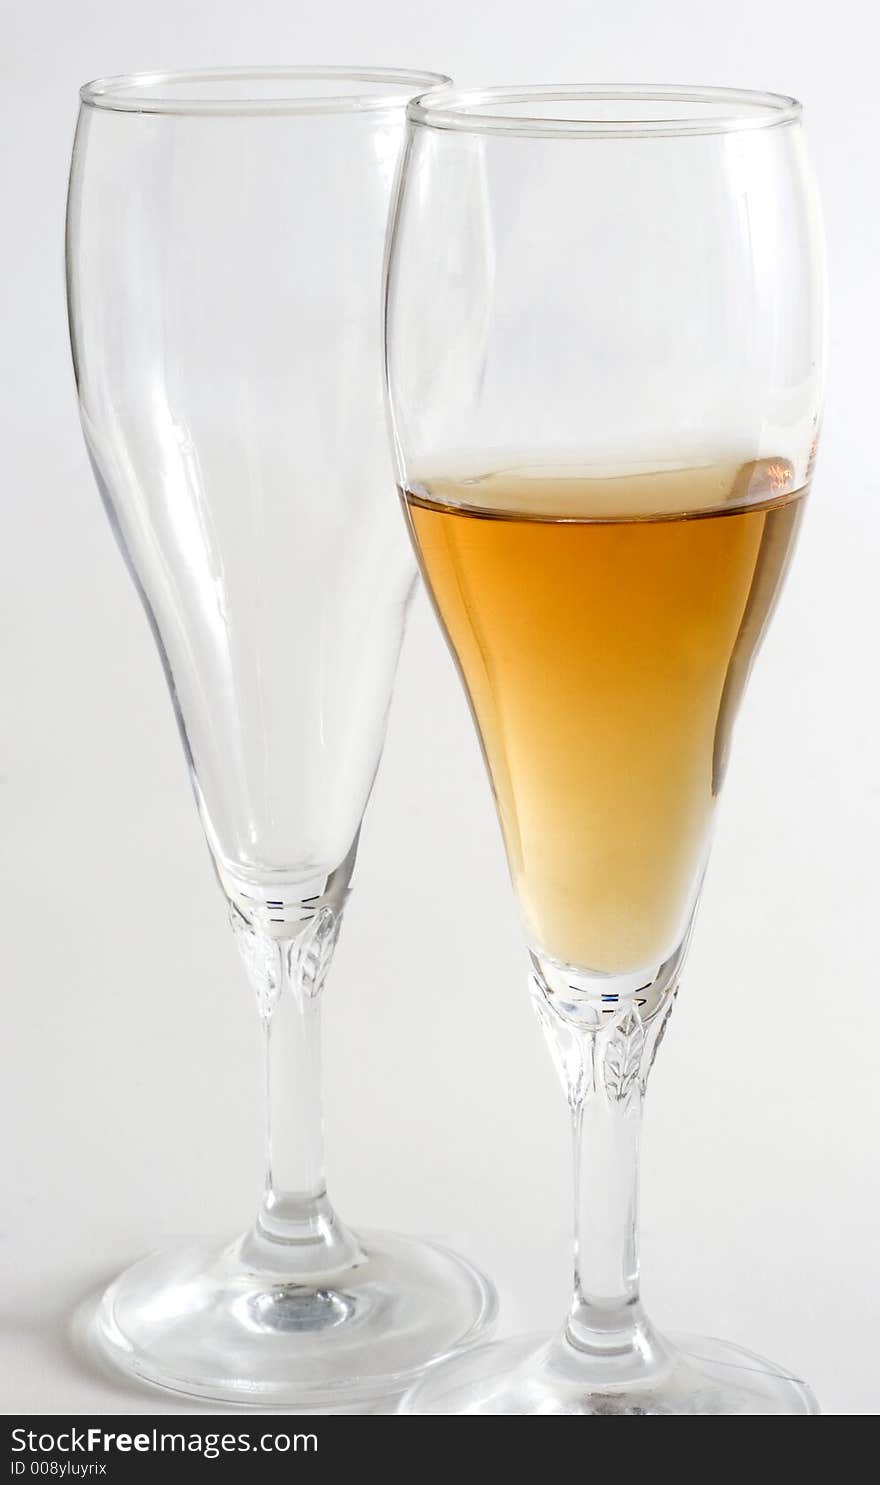 Two wine glass isolated over a white background